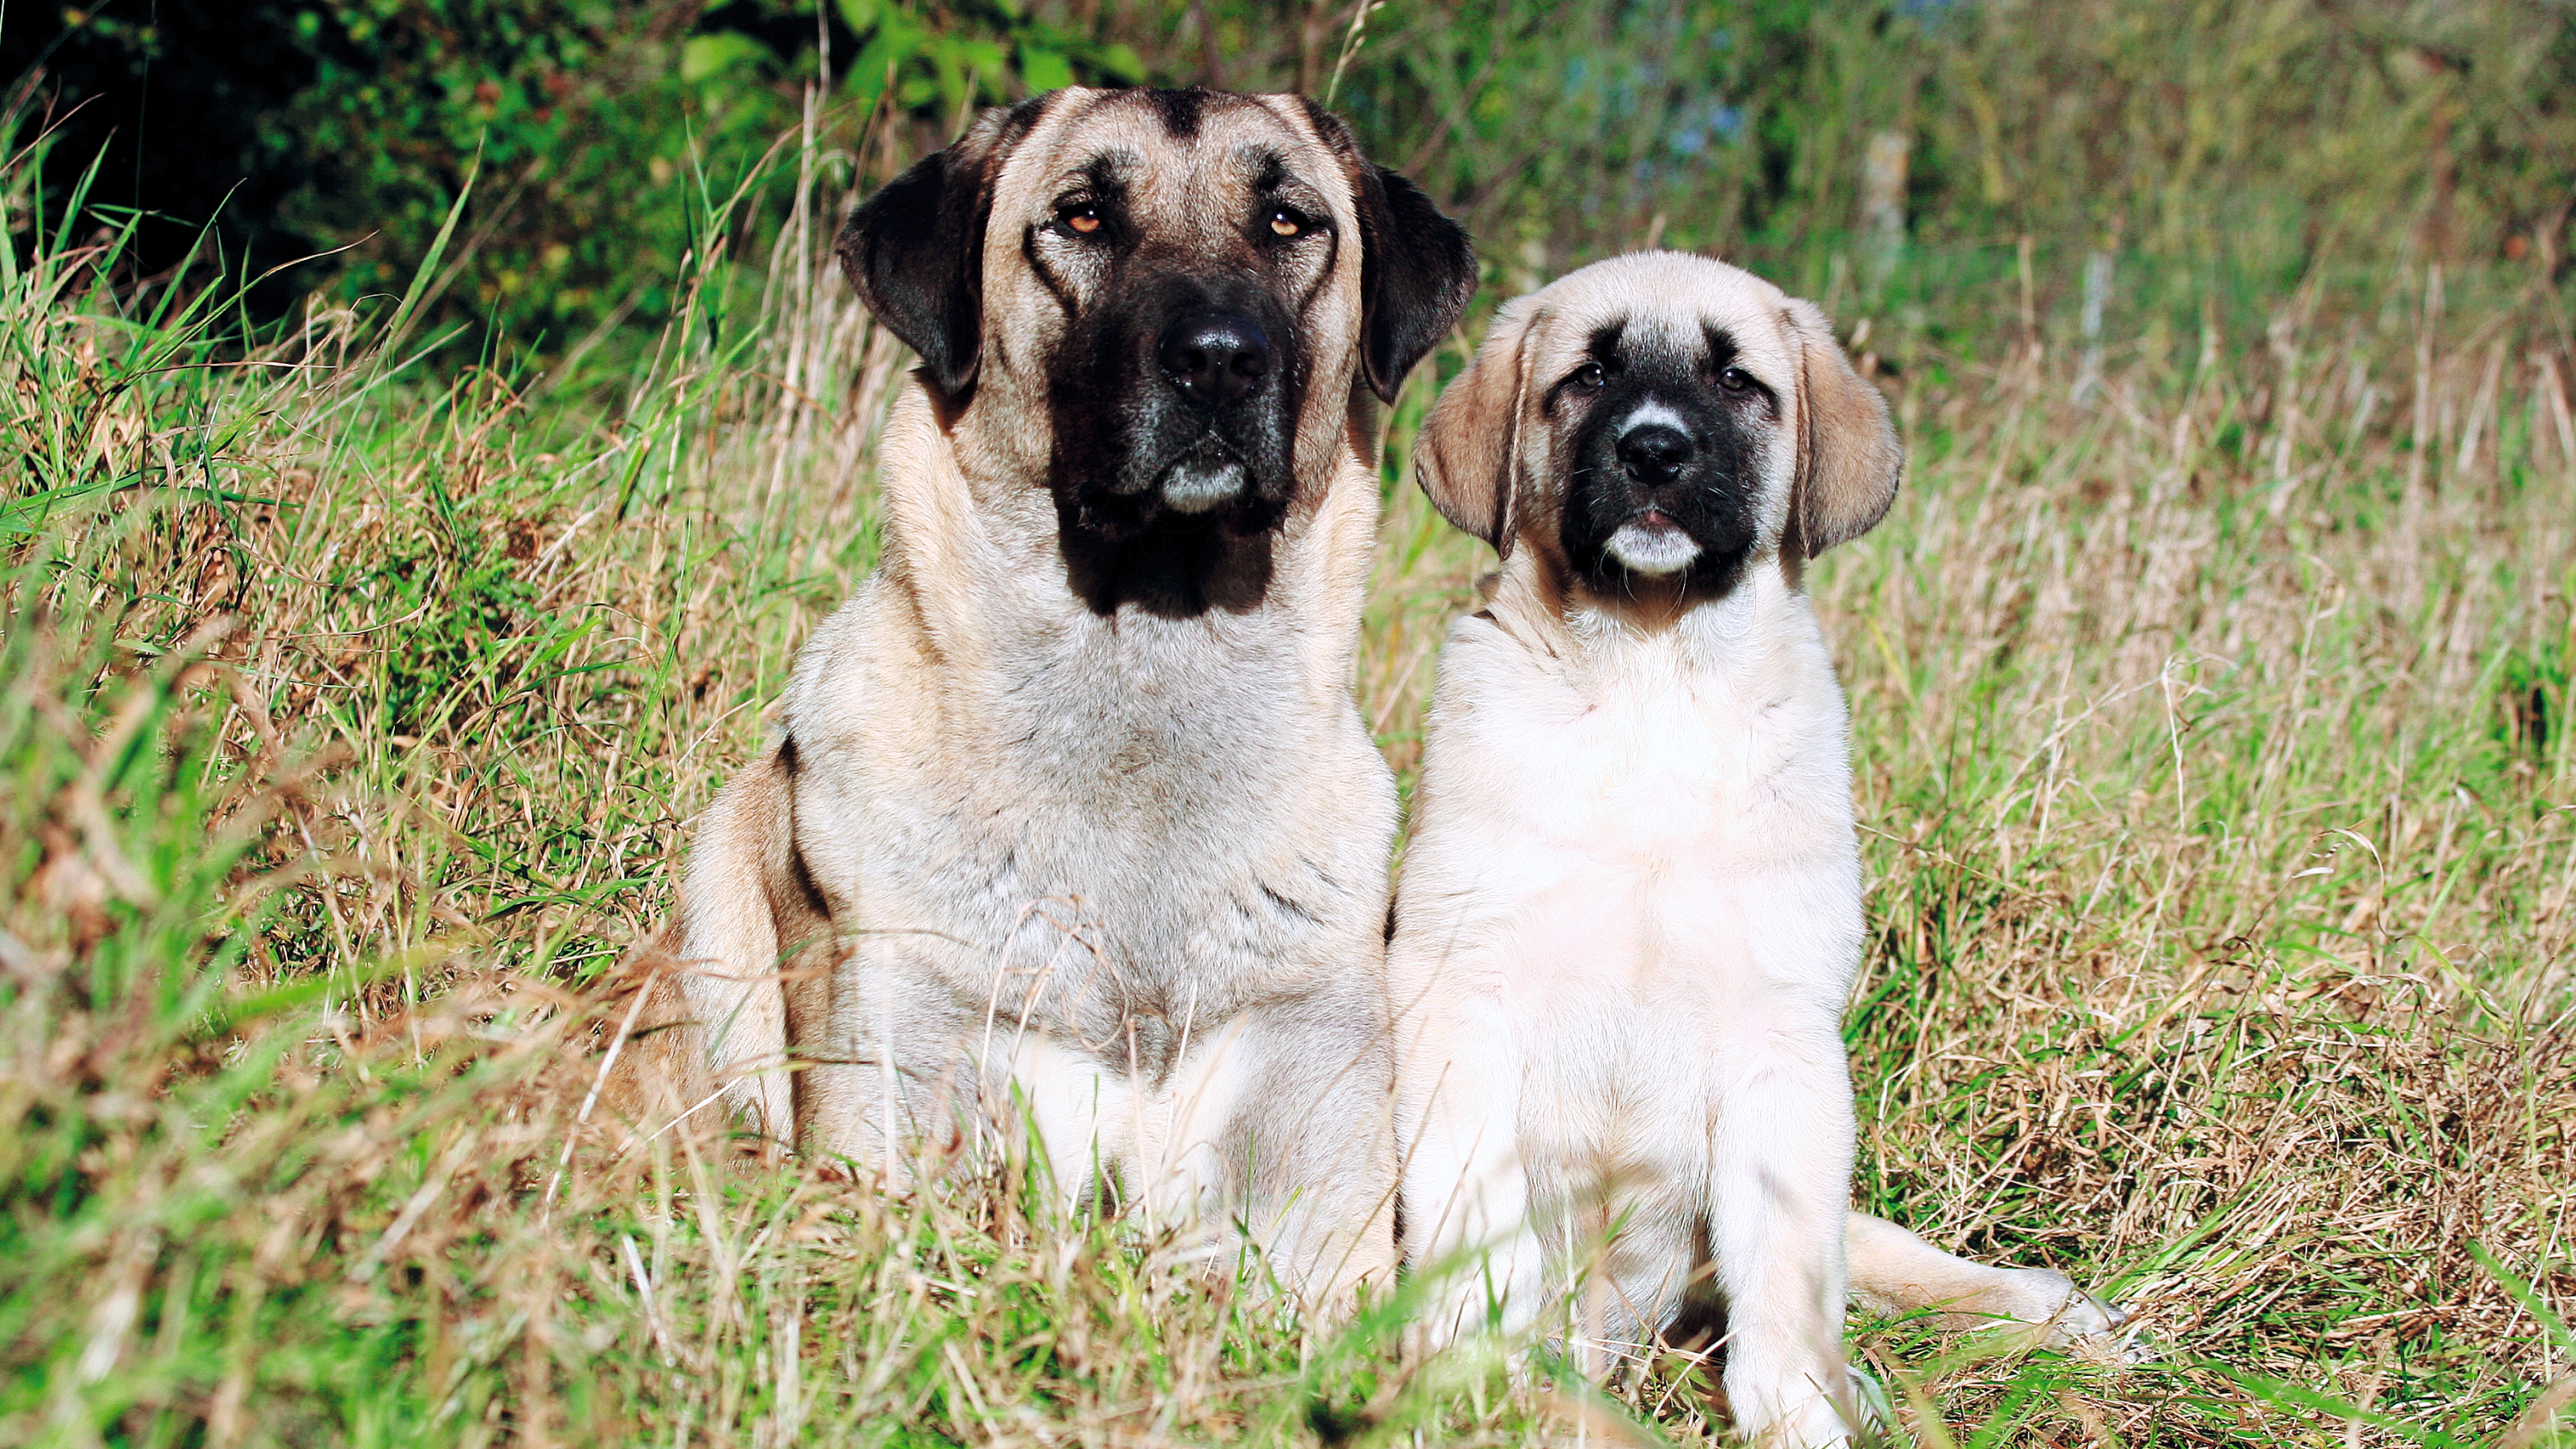 Anatolian Shepherd and a puppy sat side by side in the grass